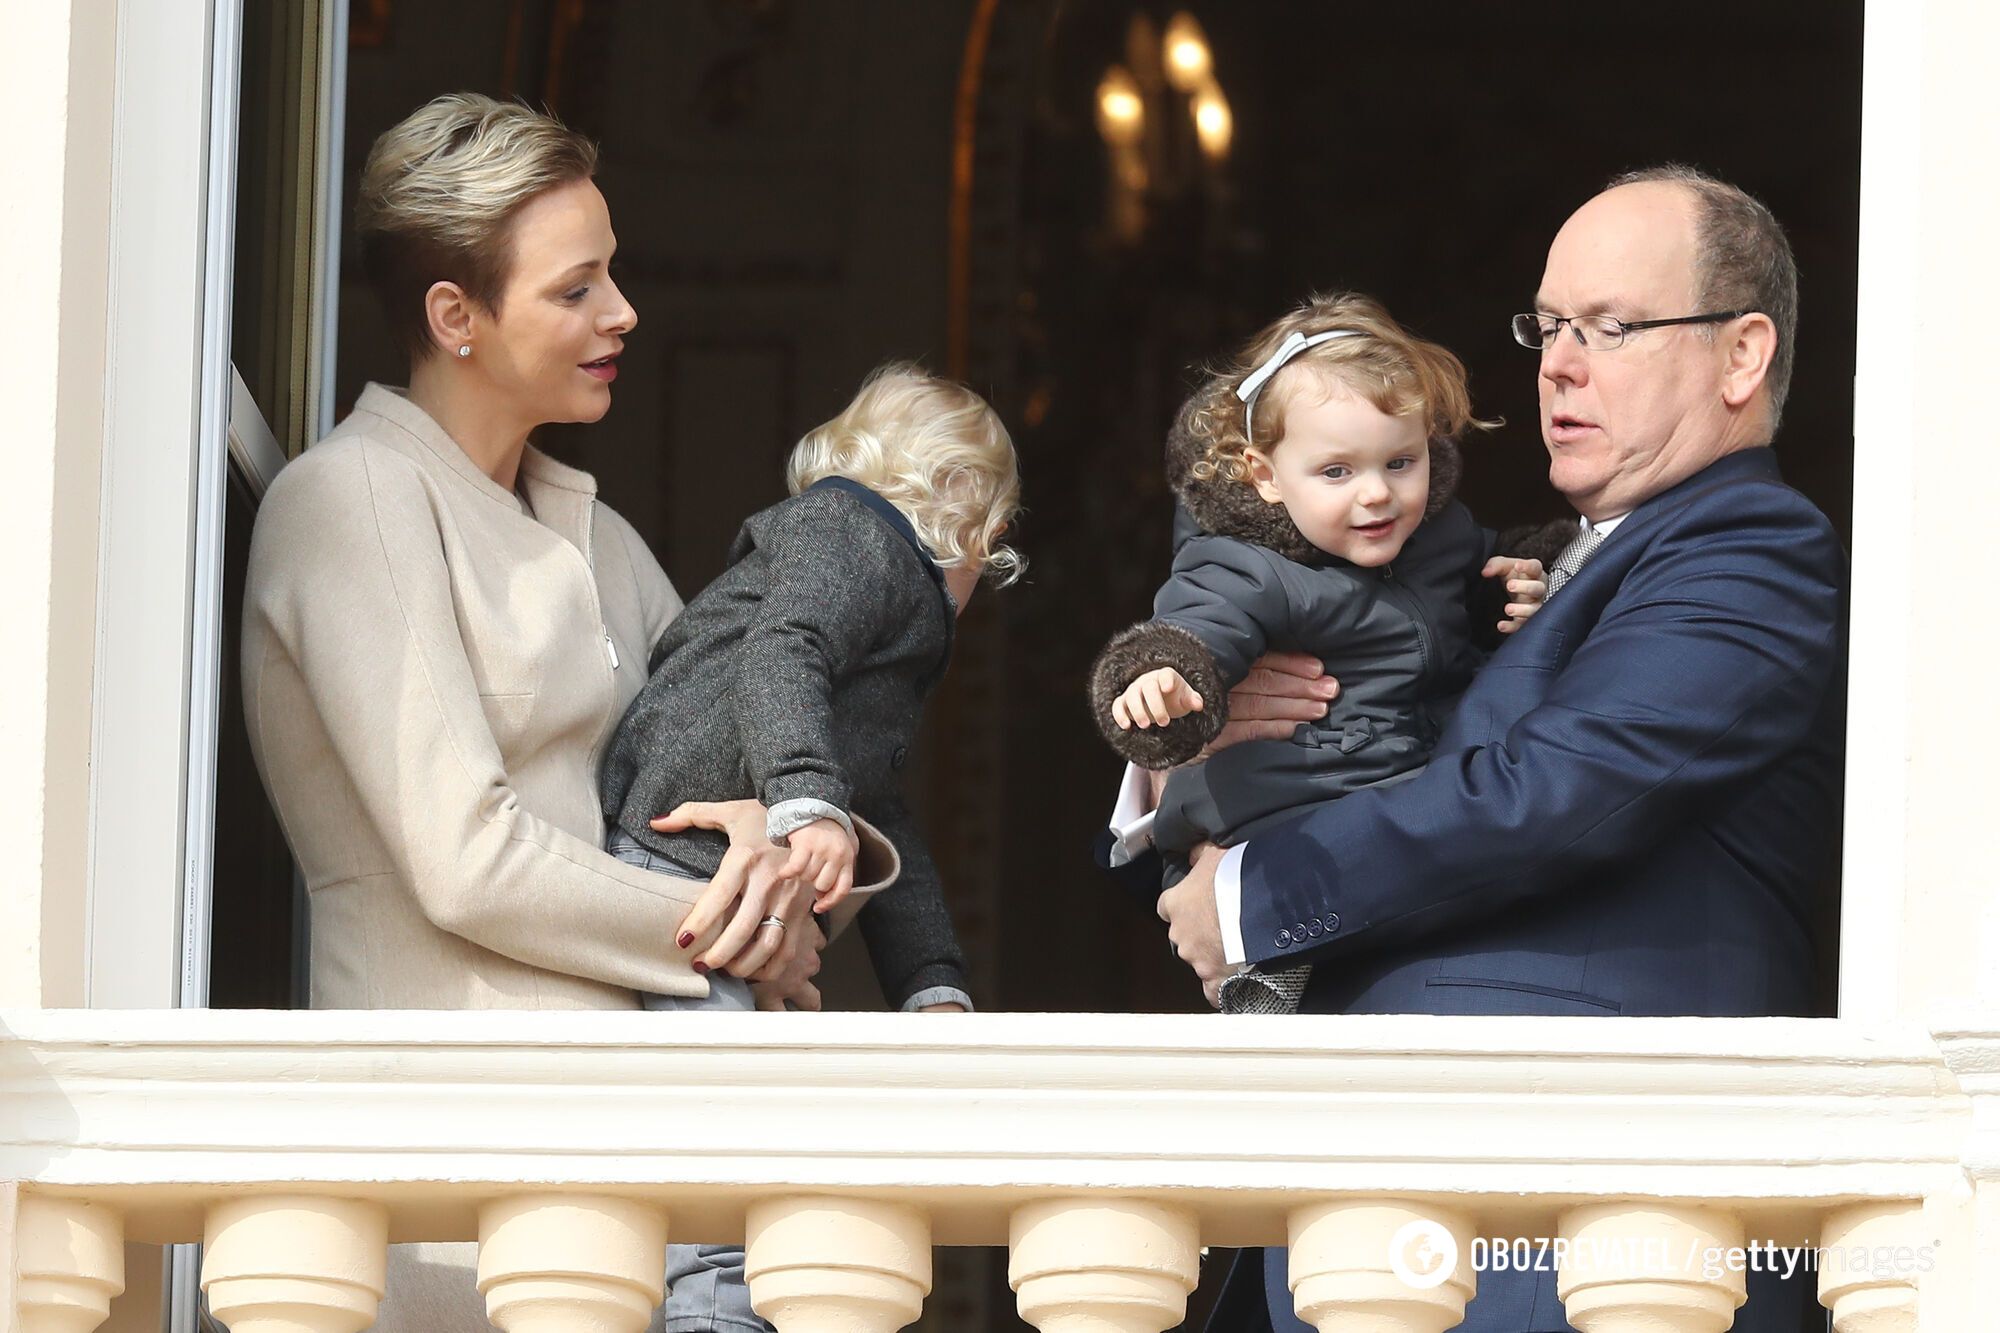 Three times she tried to escape from under the crown, cried the whole wedding and shaved her head: the impressive story of the ''sad'' Princess Charlene of Monaco